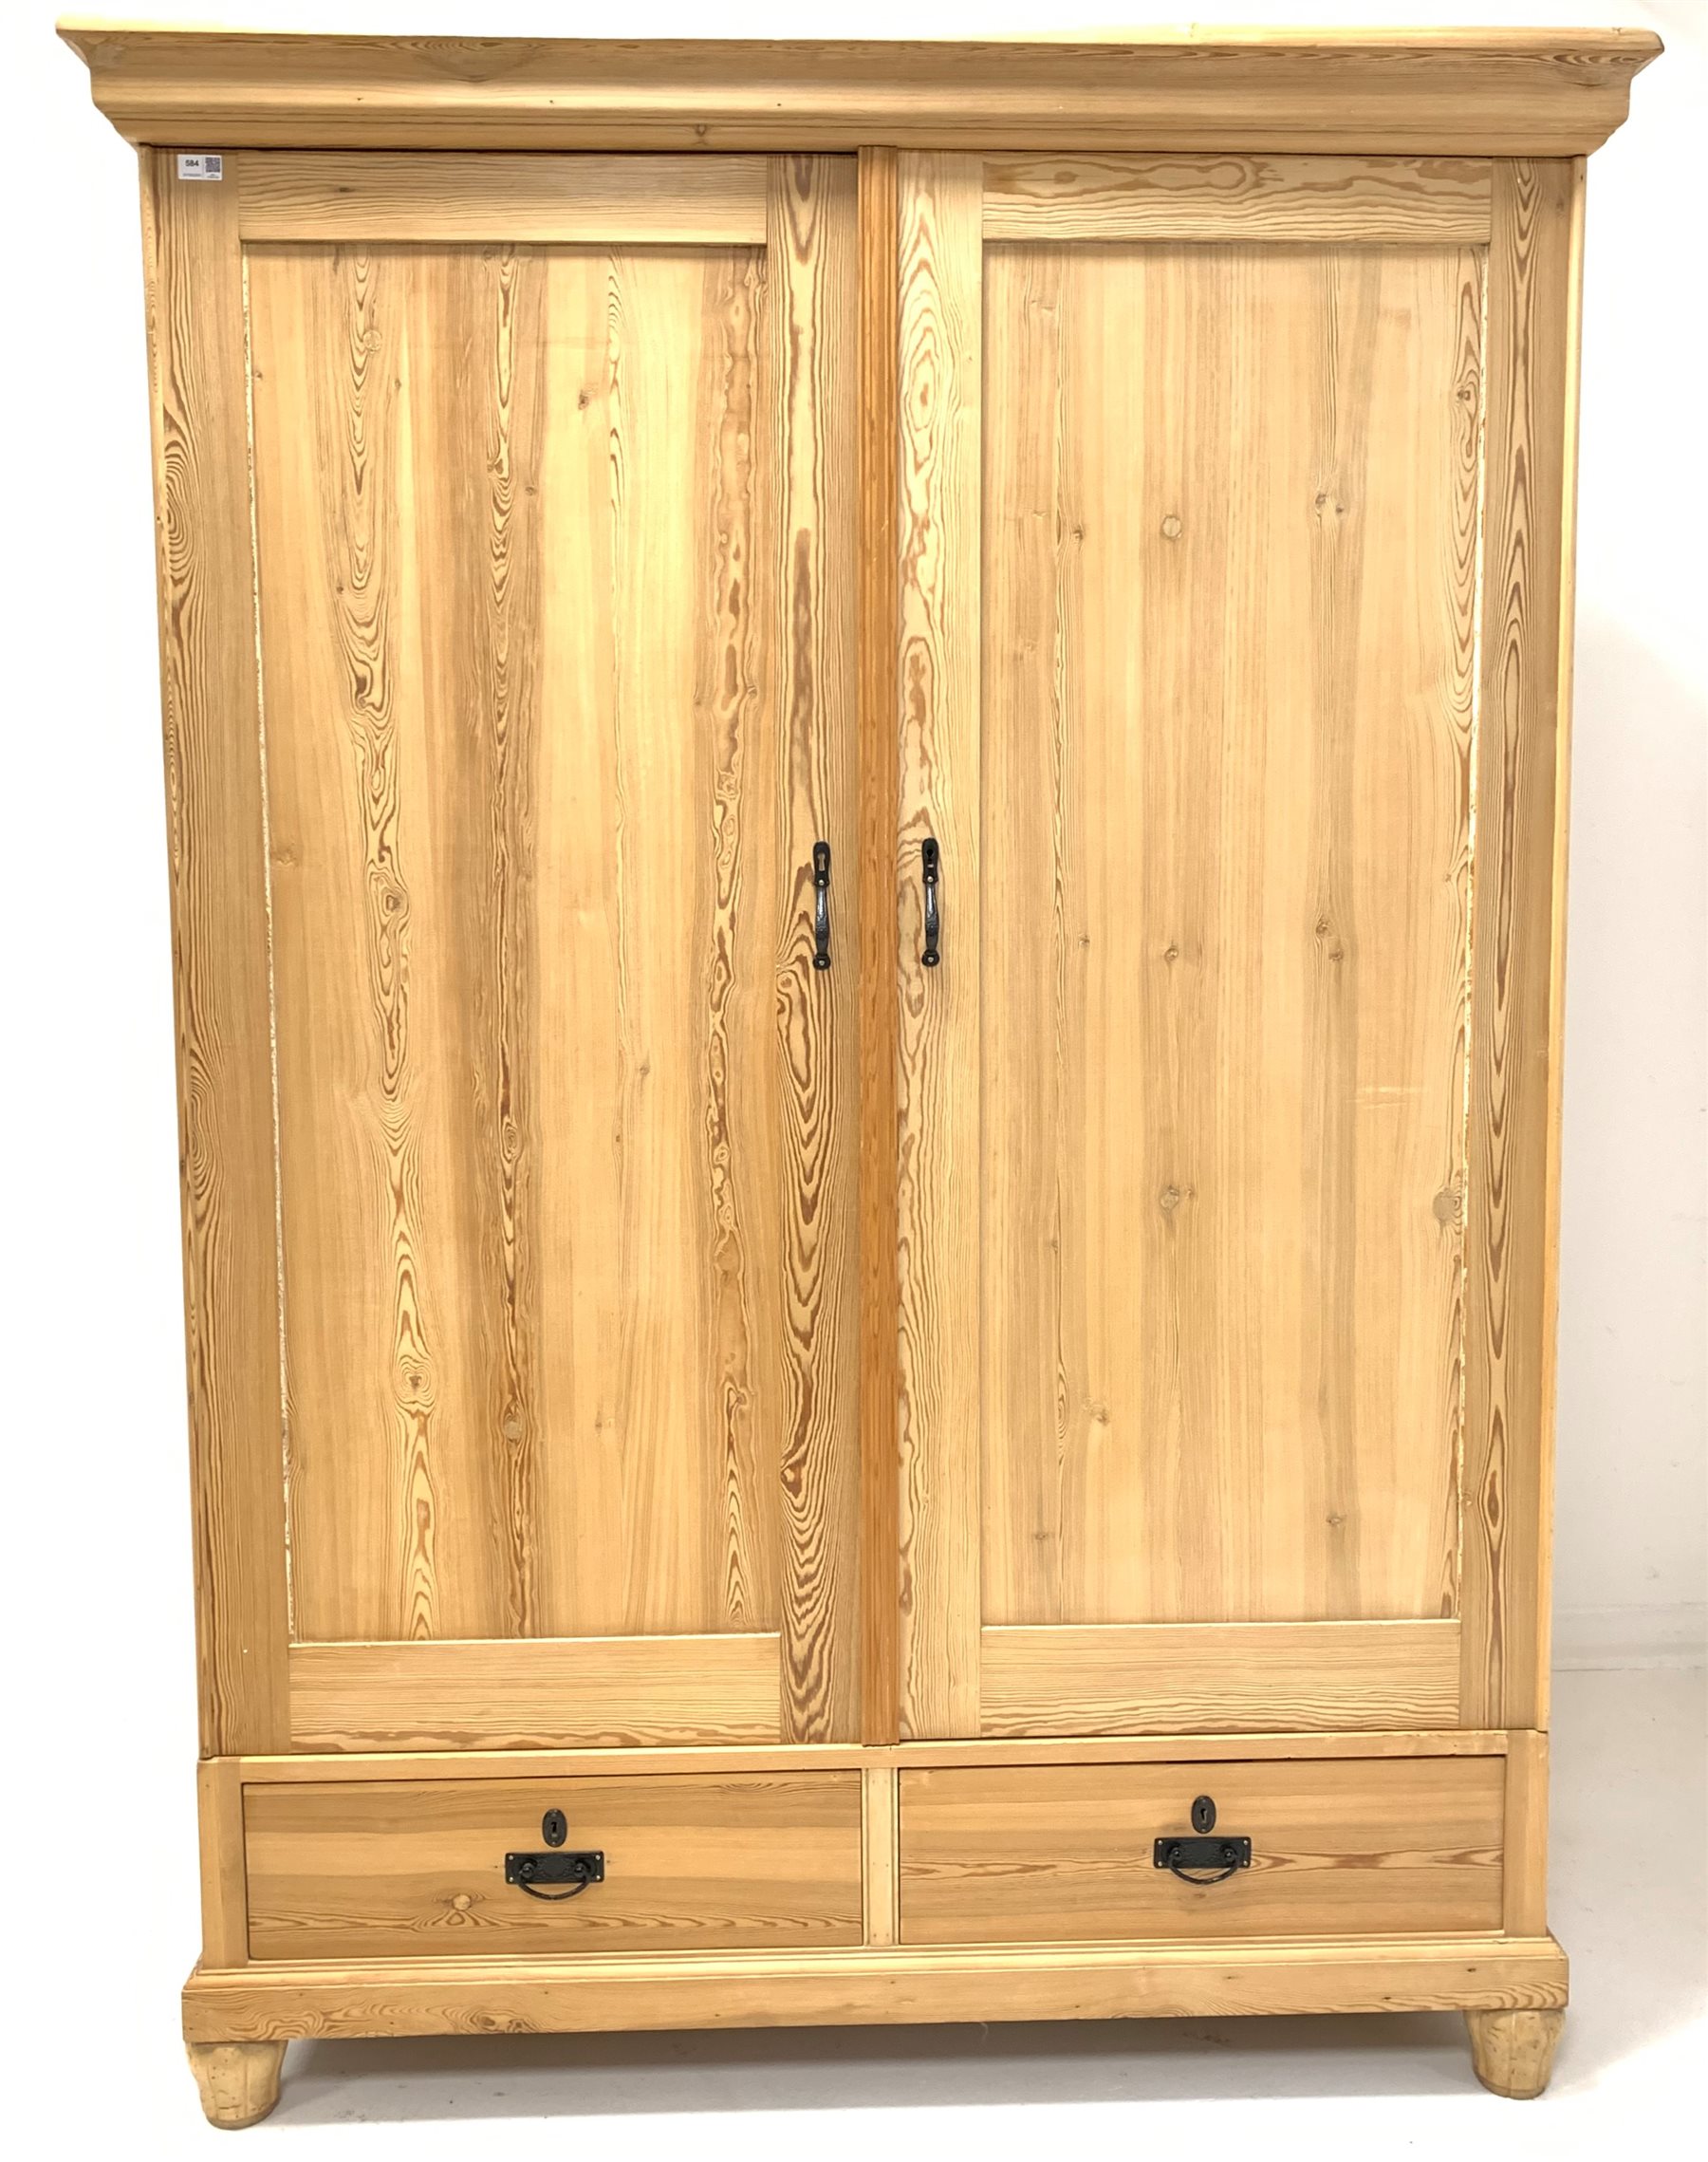 20th century stripped pine double wardrobe, projecting cornice over two panelled doors enclosing int